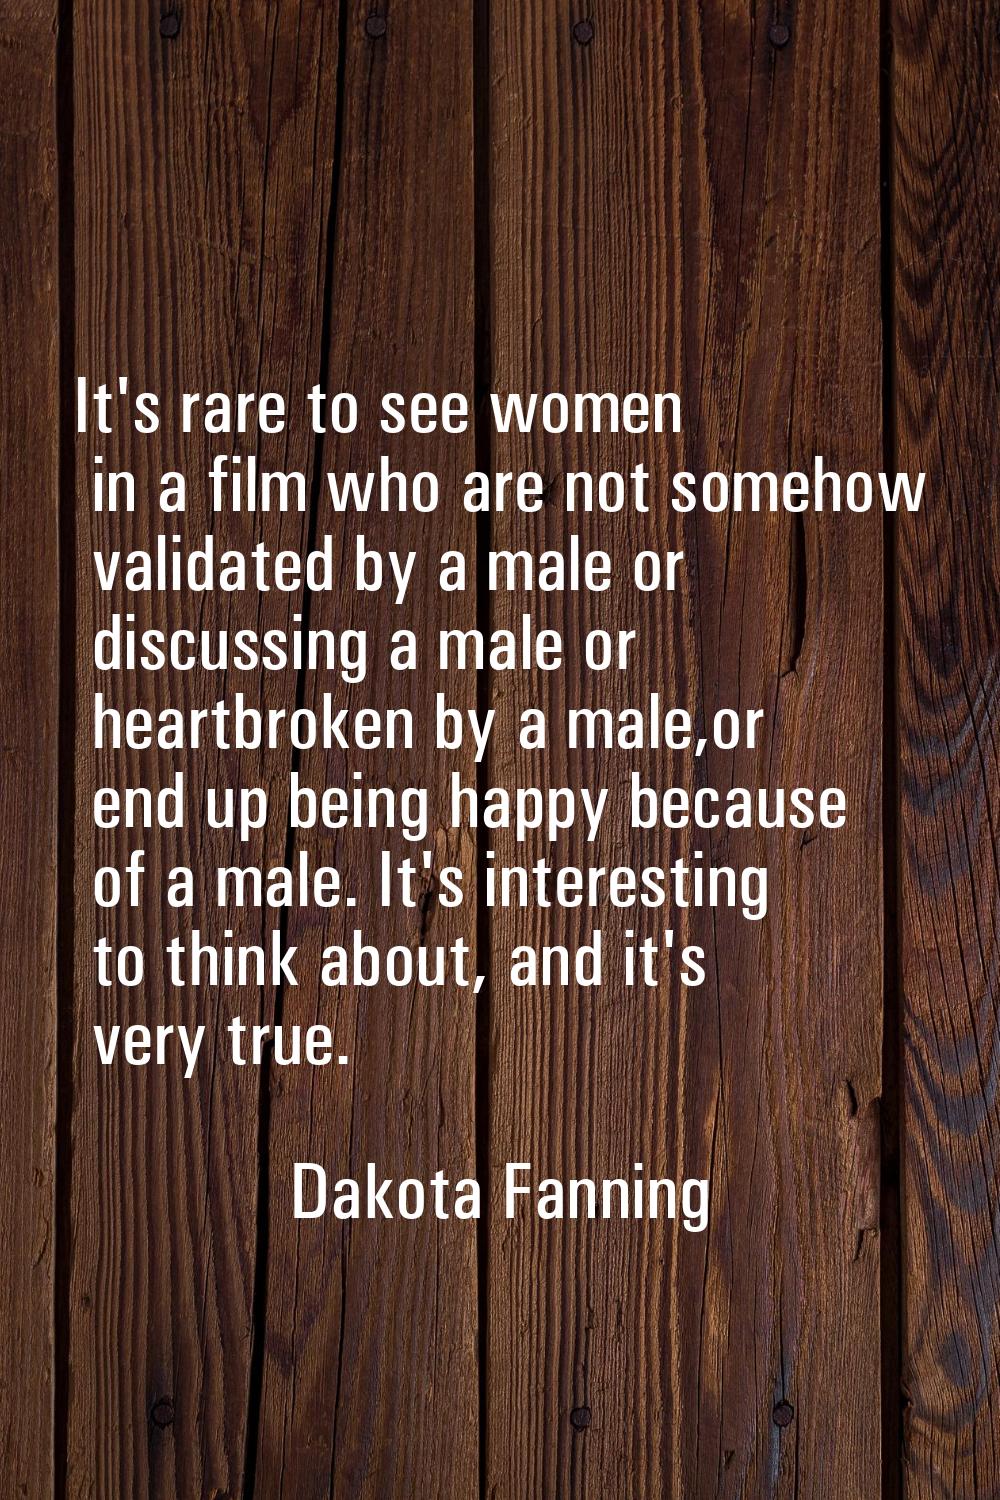 It's rare to see women in a film who are not somehow validated by a male or discussing a male or he